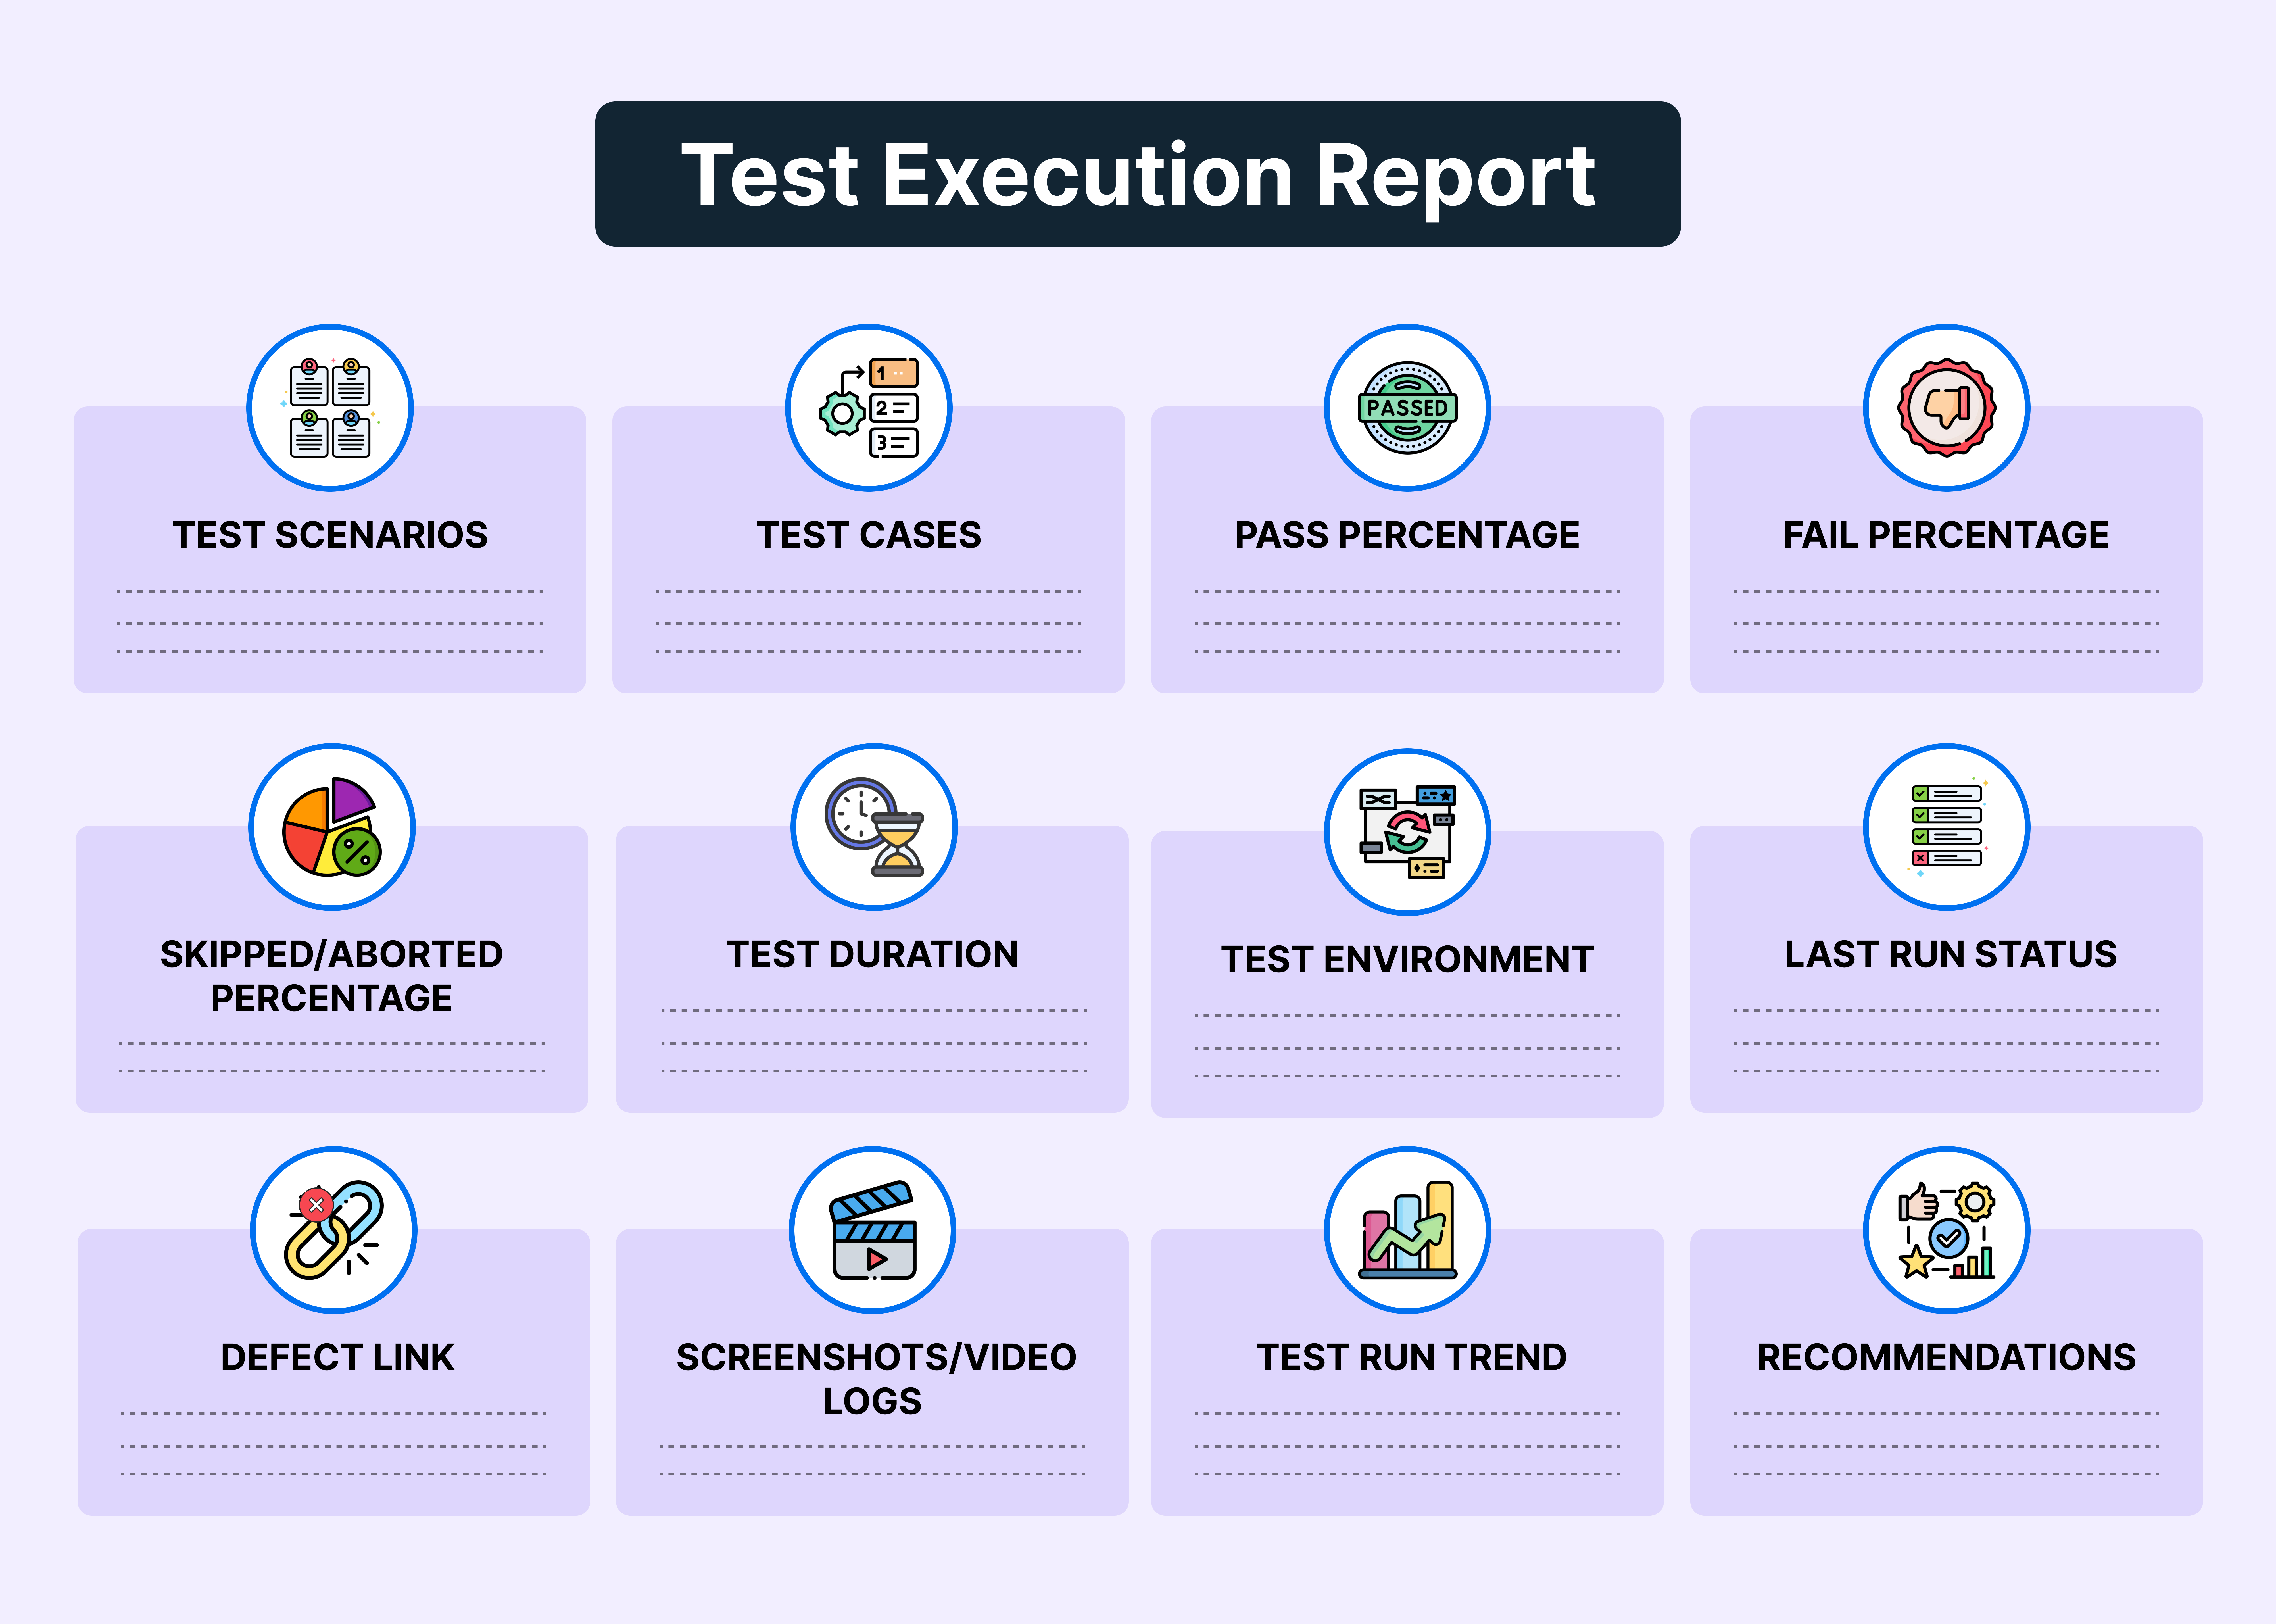 Test Execution Report